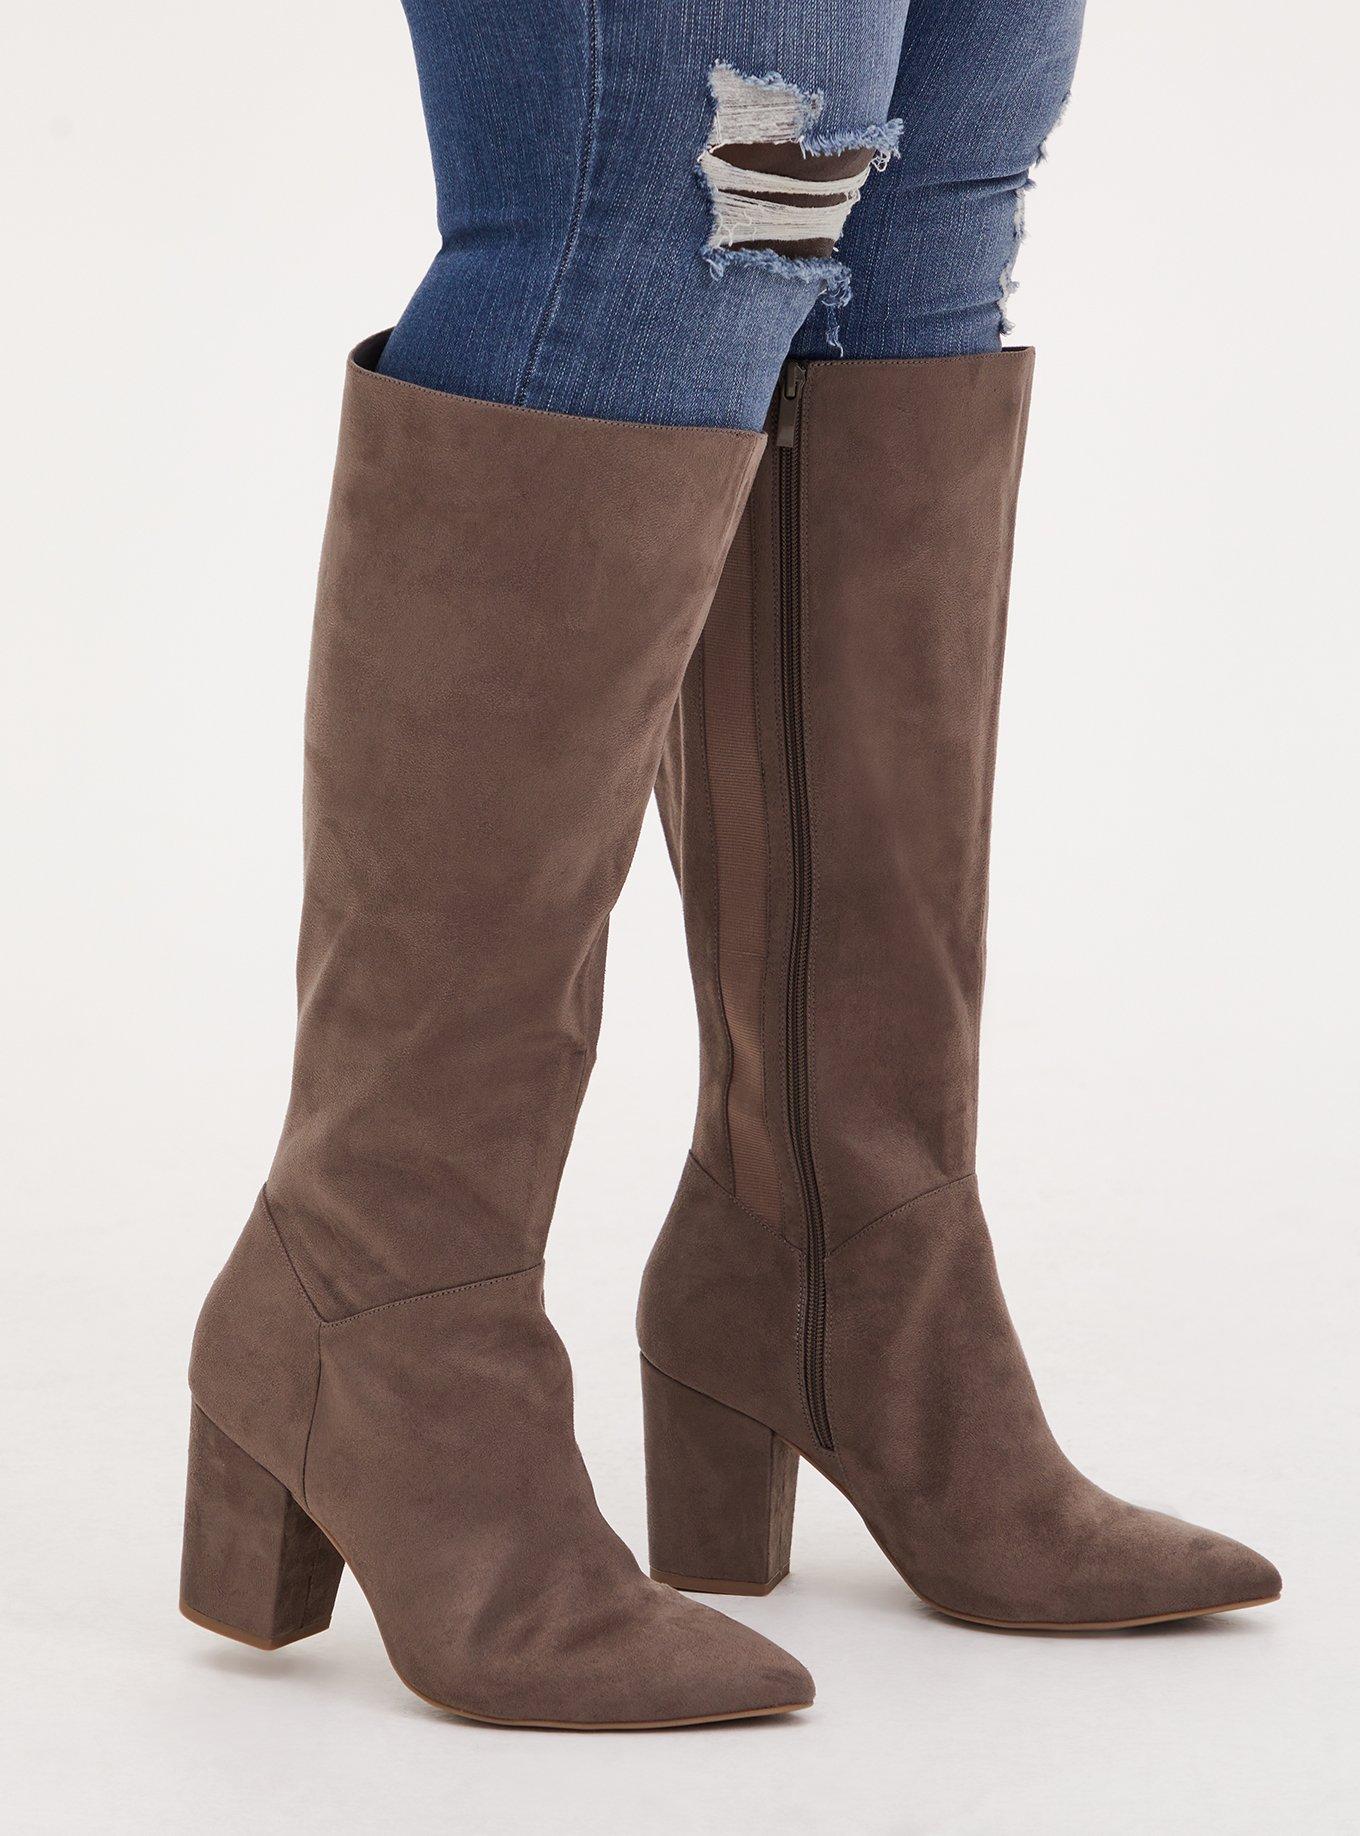 Plus Size - Pointed Toe Knee-High Boot (WW) - Torrid